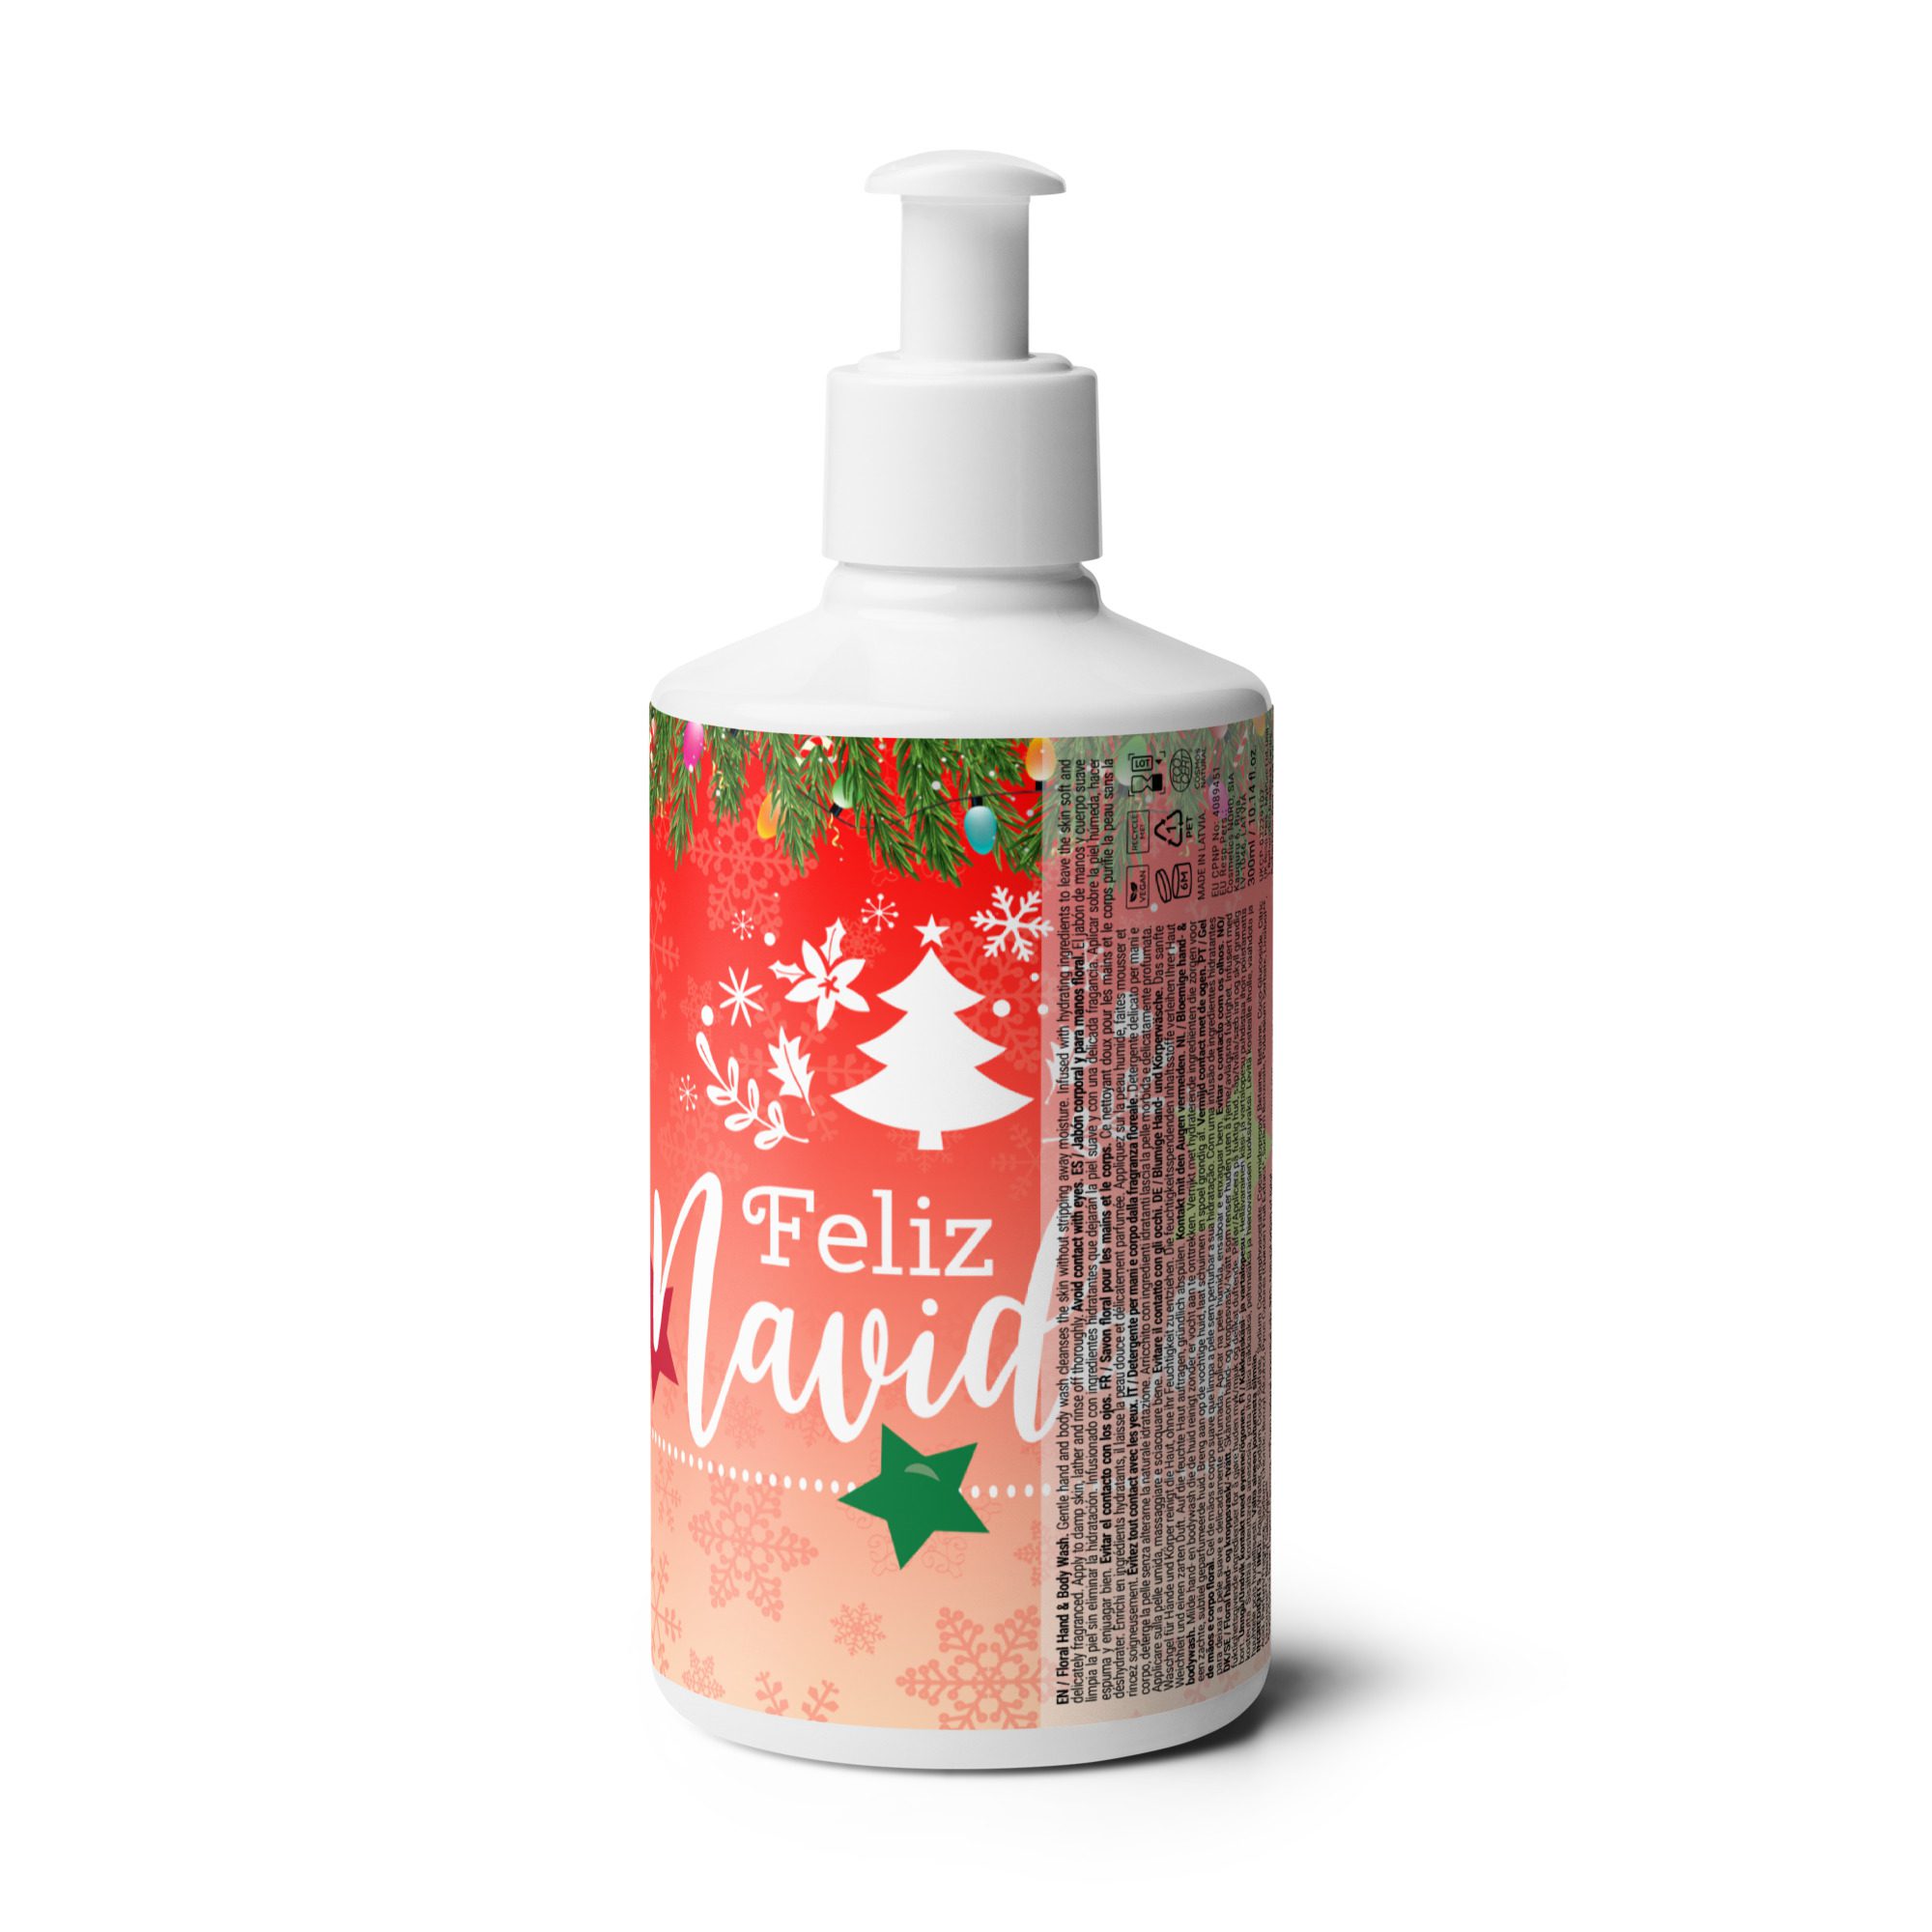 floral hand body wash white right 655d0cf4a665f